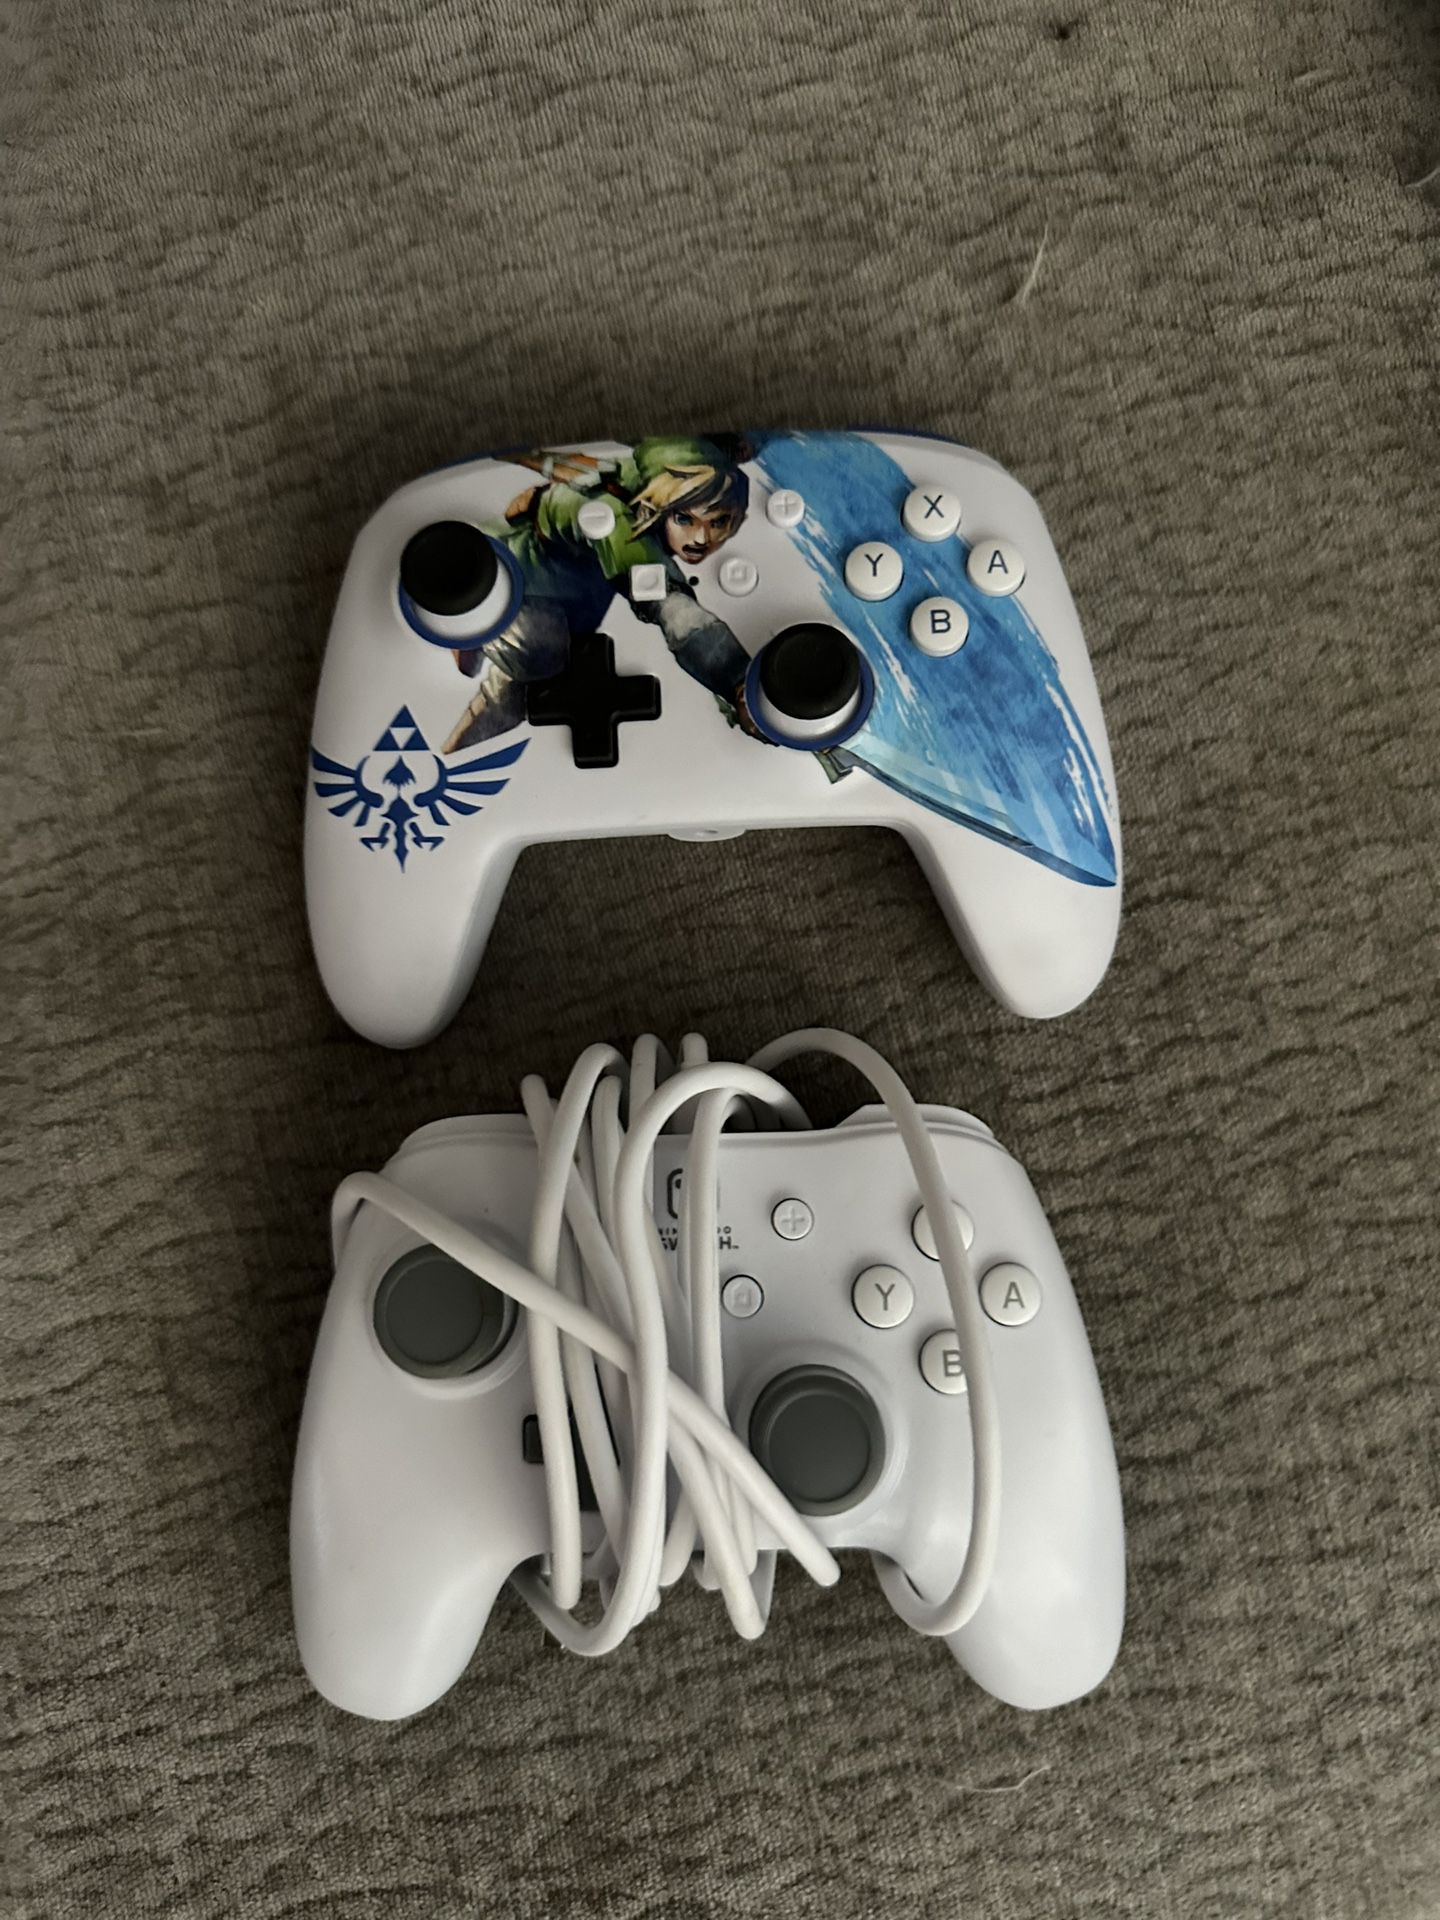 Nintendo Switch controllers